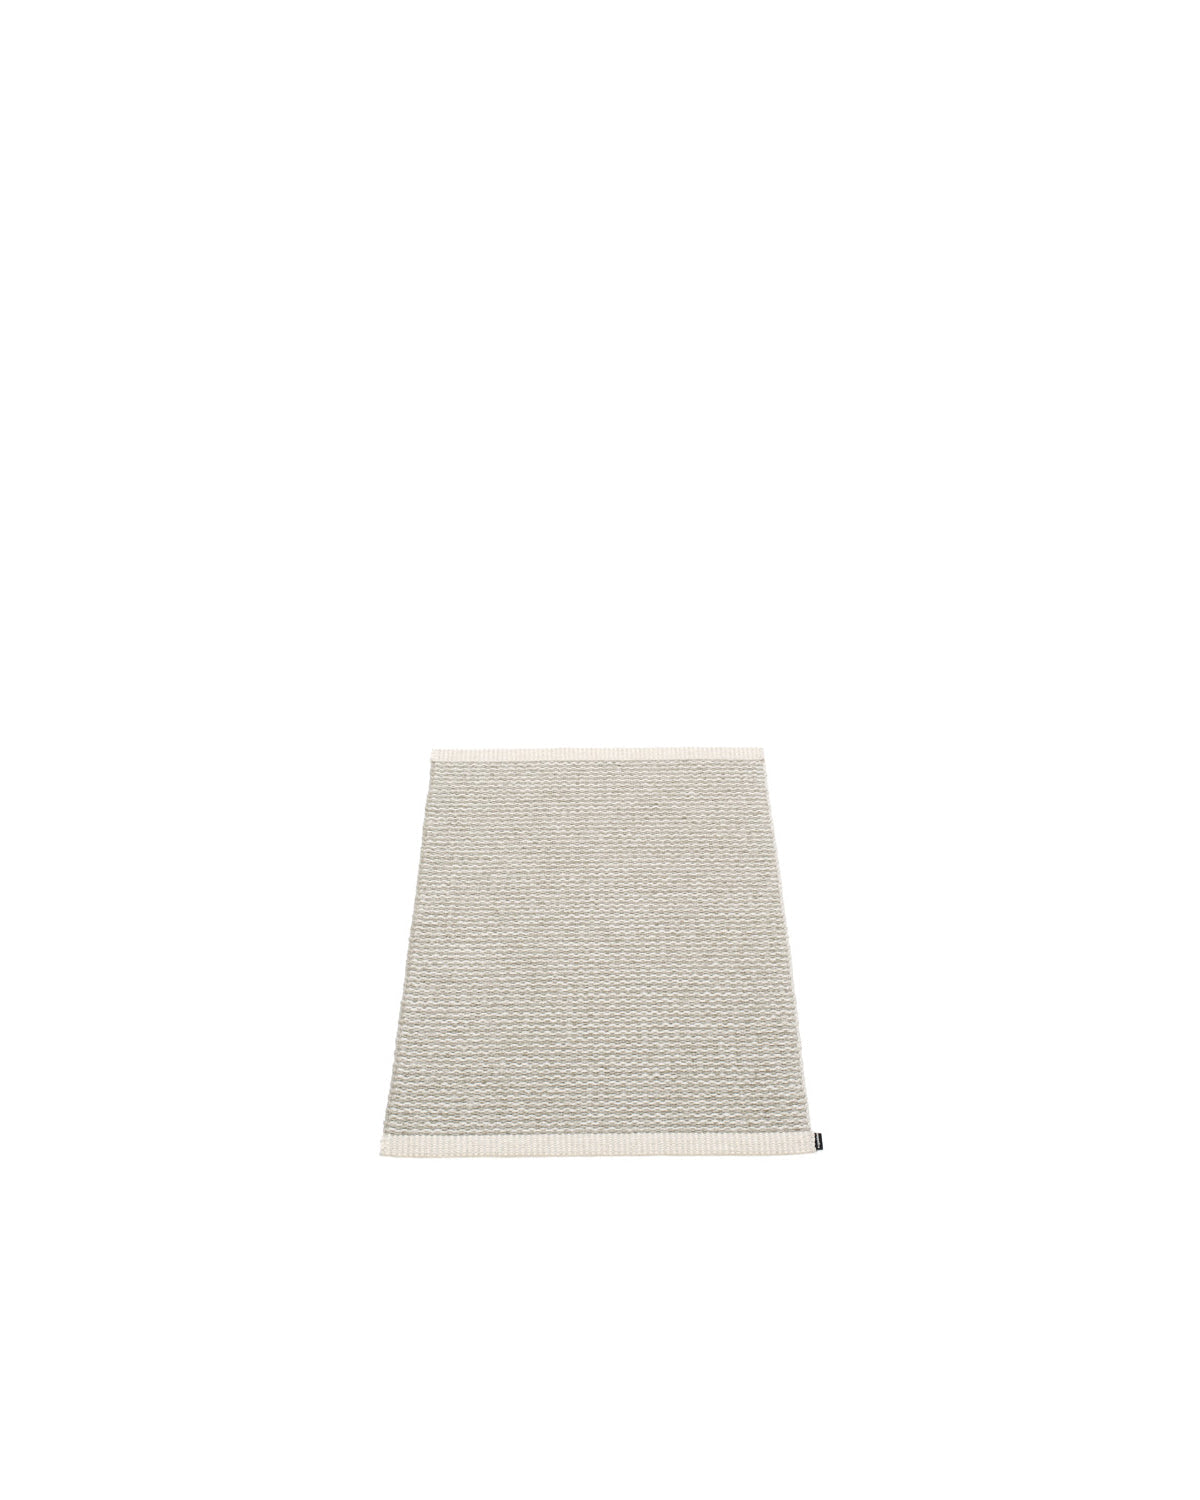 Pappelina Rug MONO Fossil Grey  image 1